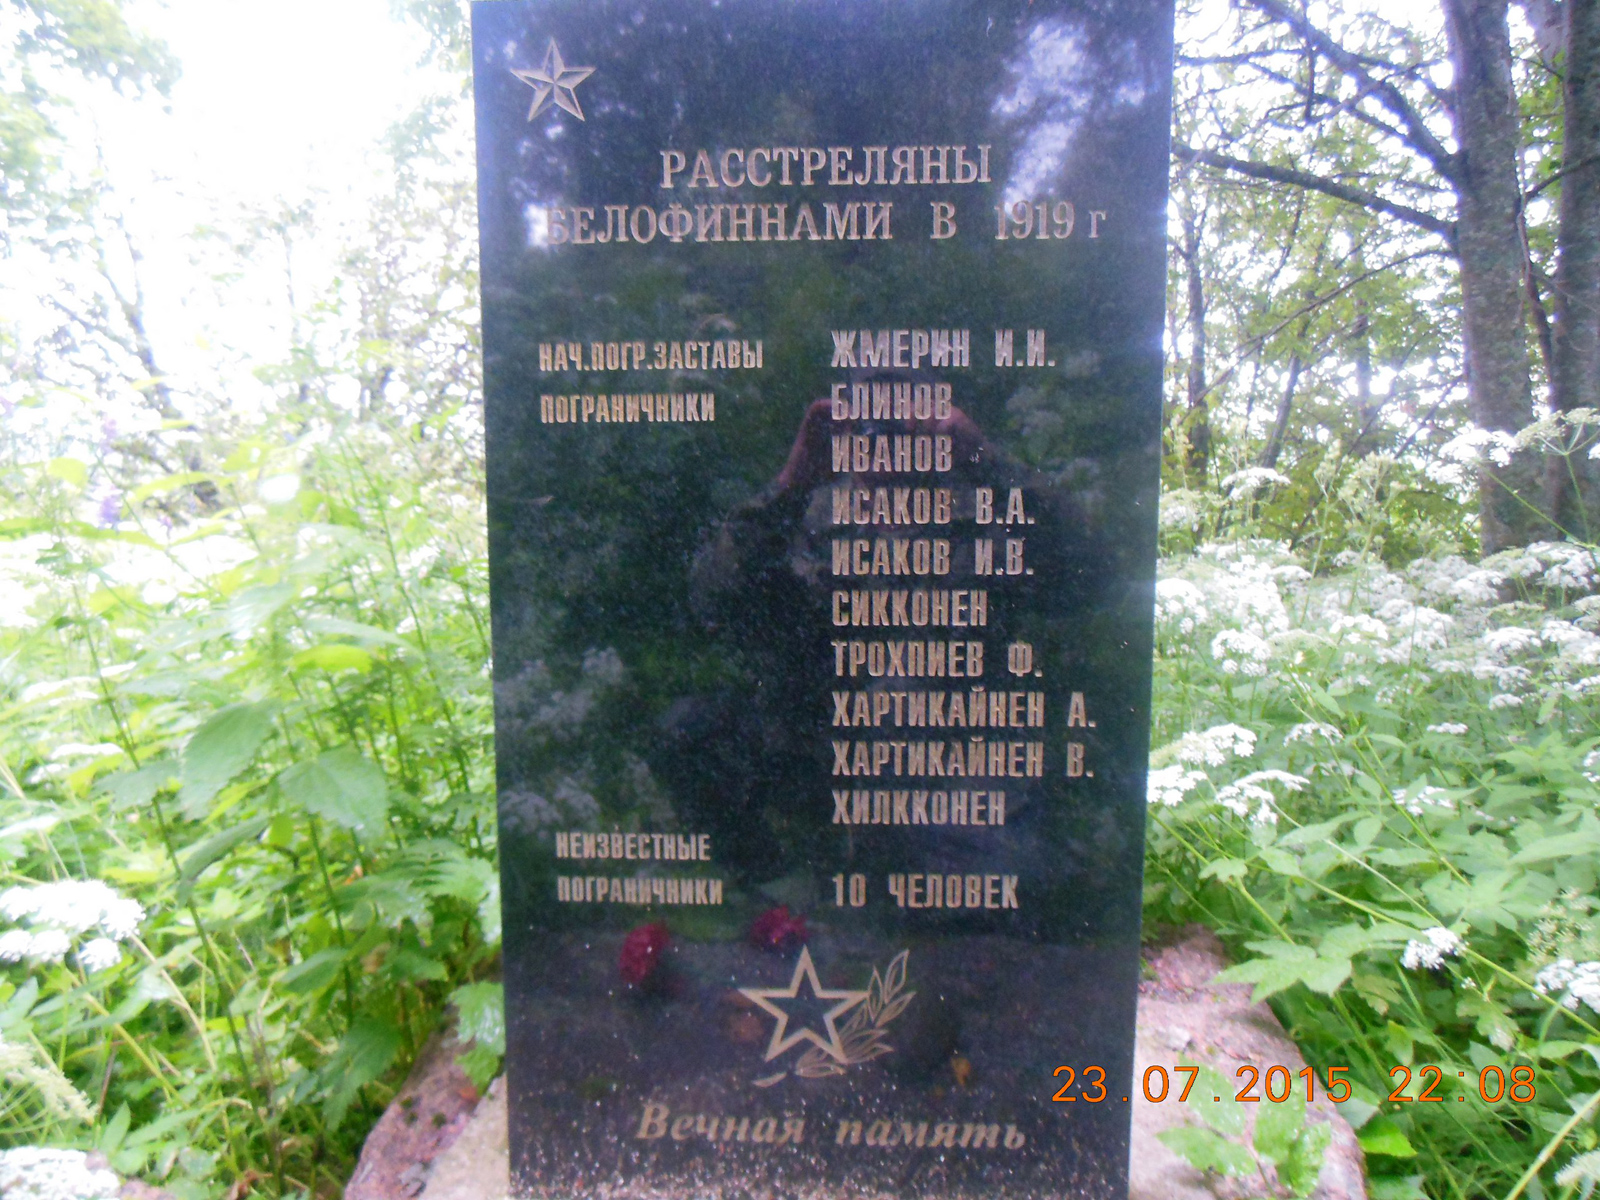 July 23, 2015. Mass grave of Red border guards